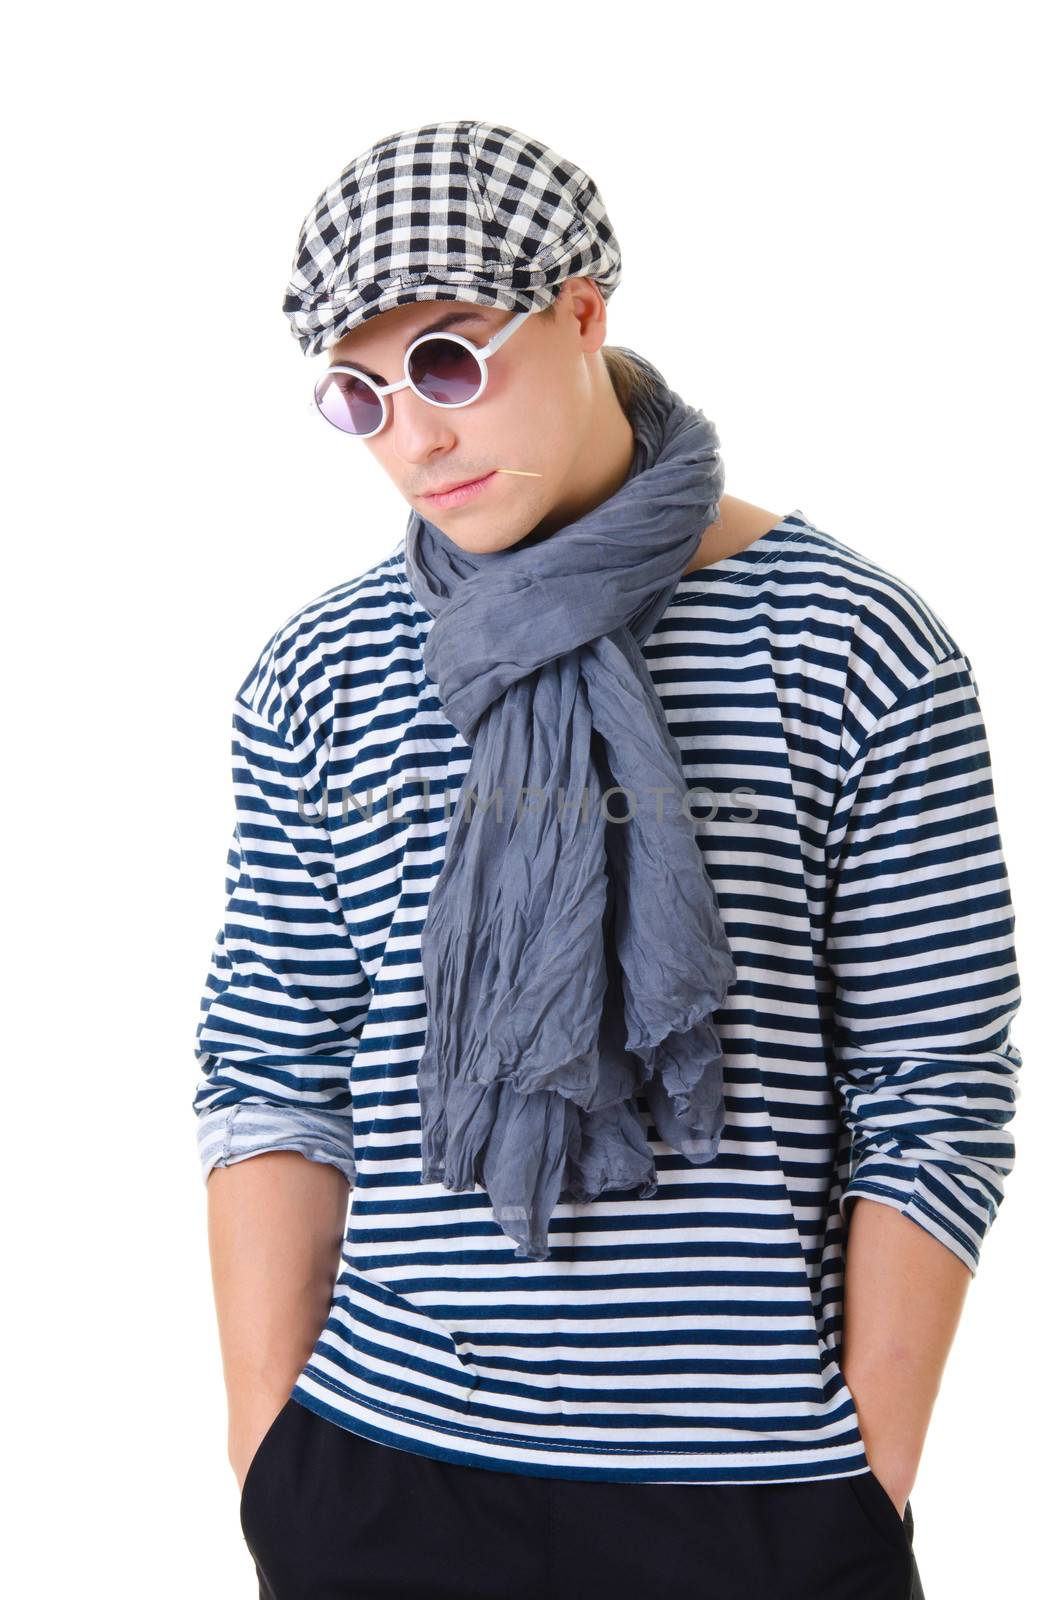 Look naughty handsome young man in stylish striped dress, glasses and cap with suitcase